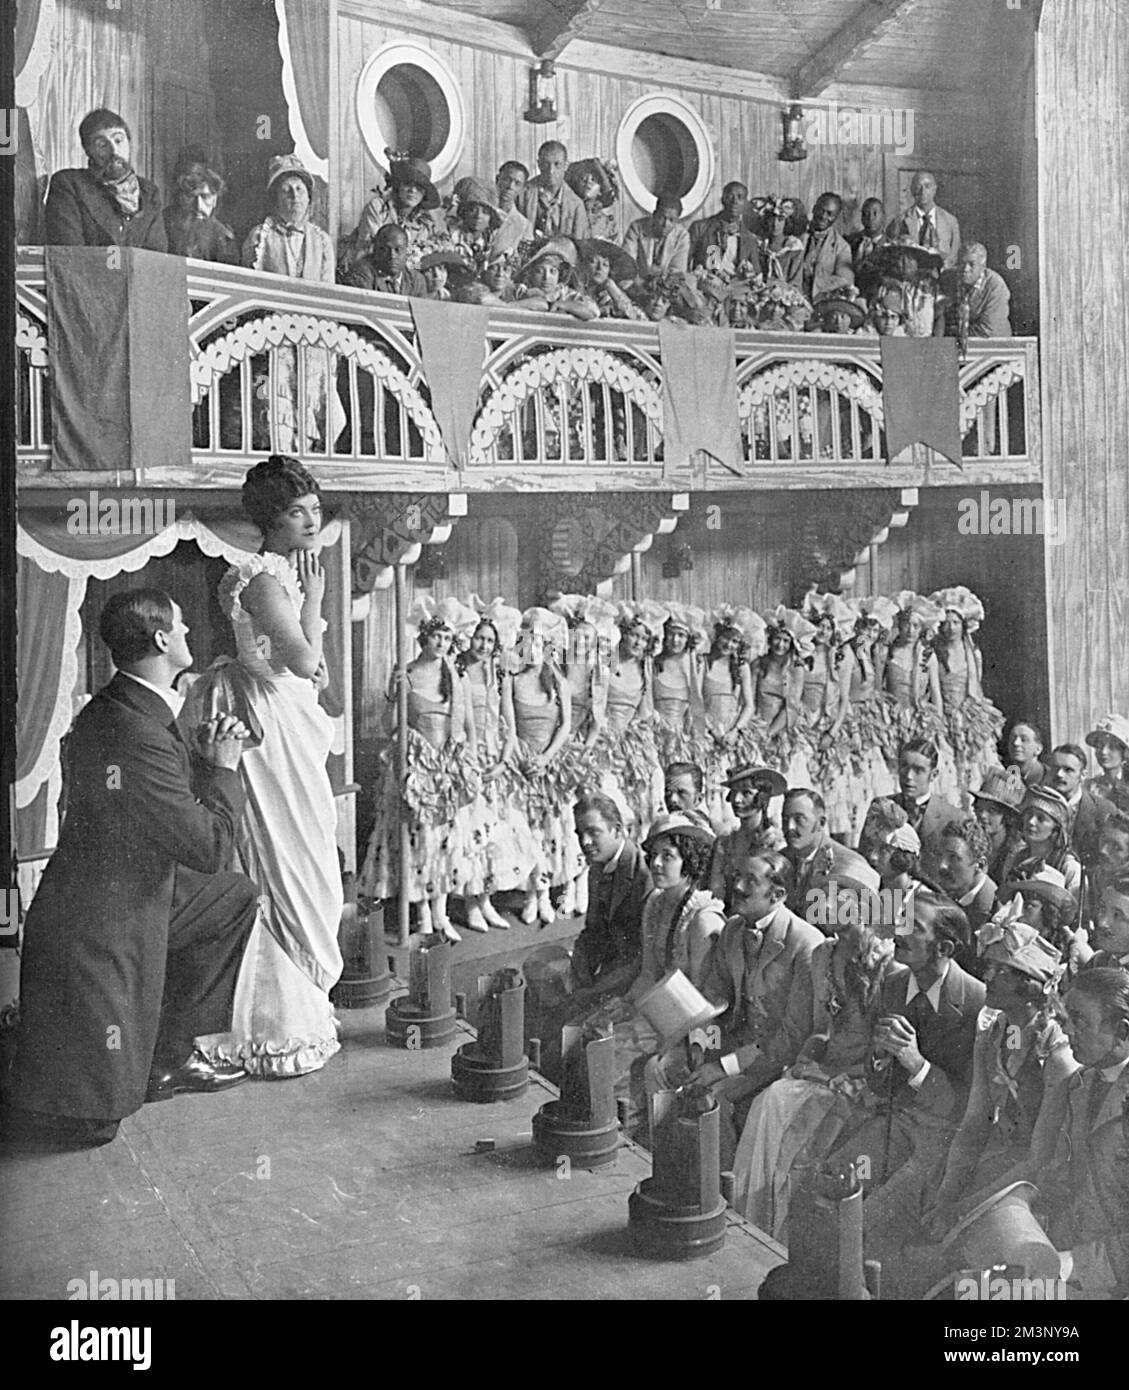 The auditorium and stage of the 'Cotton Blossom', as Captain Andy's show boat is called in the musical, Show Boat.  Howett Worster and Edith Day playing the third act of the 'Parson's Bride' to the mixed company of black and white, of the levee town of Natchez.  Show Boat was originally written by Edna Ferber and adapted by Oscar Hammerstein as a stage musical with the black actor, Paul Robeson starring as Joe.     Date: 1928 Stock Photo